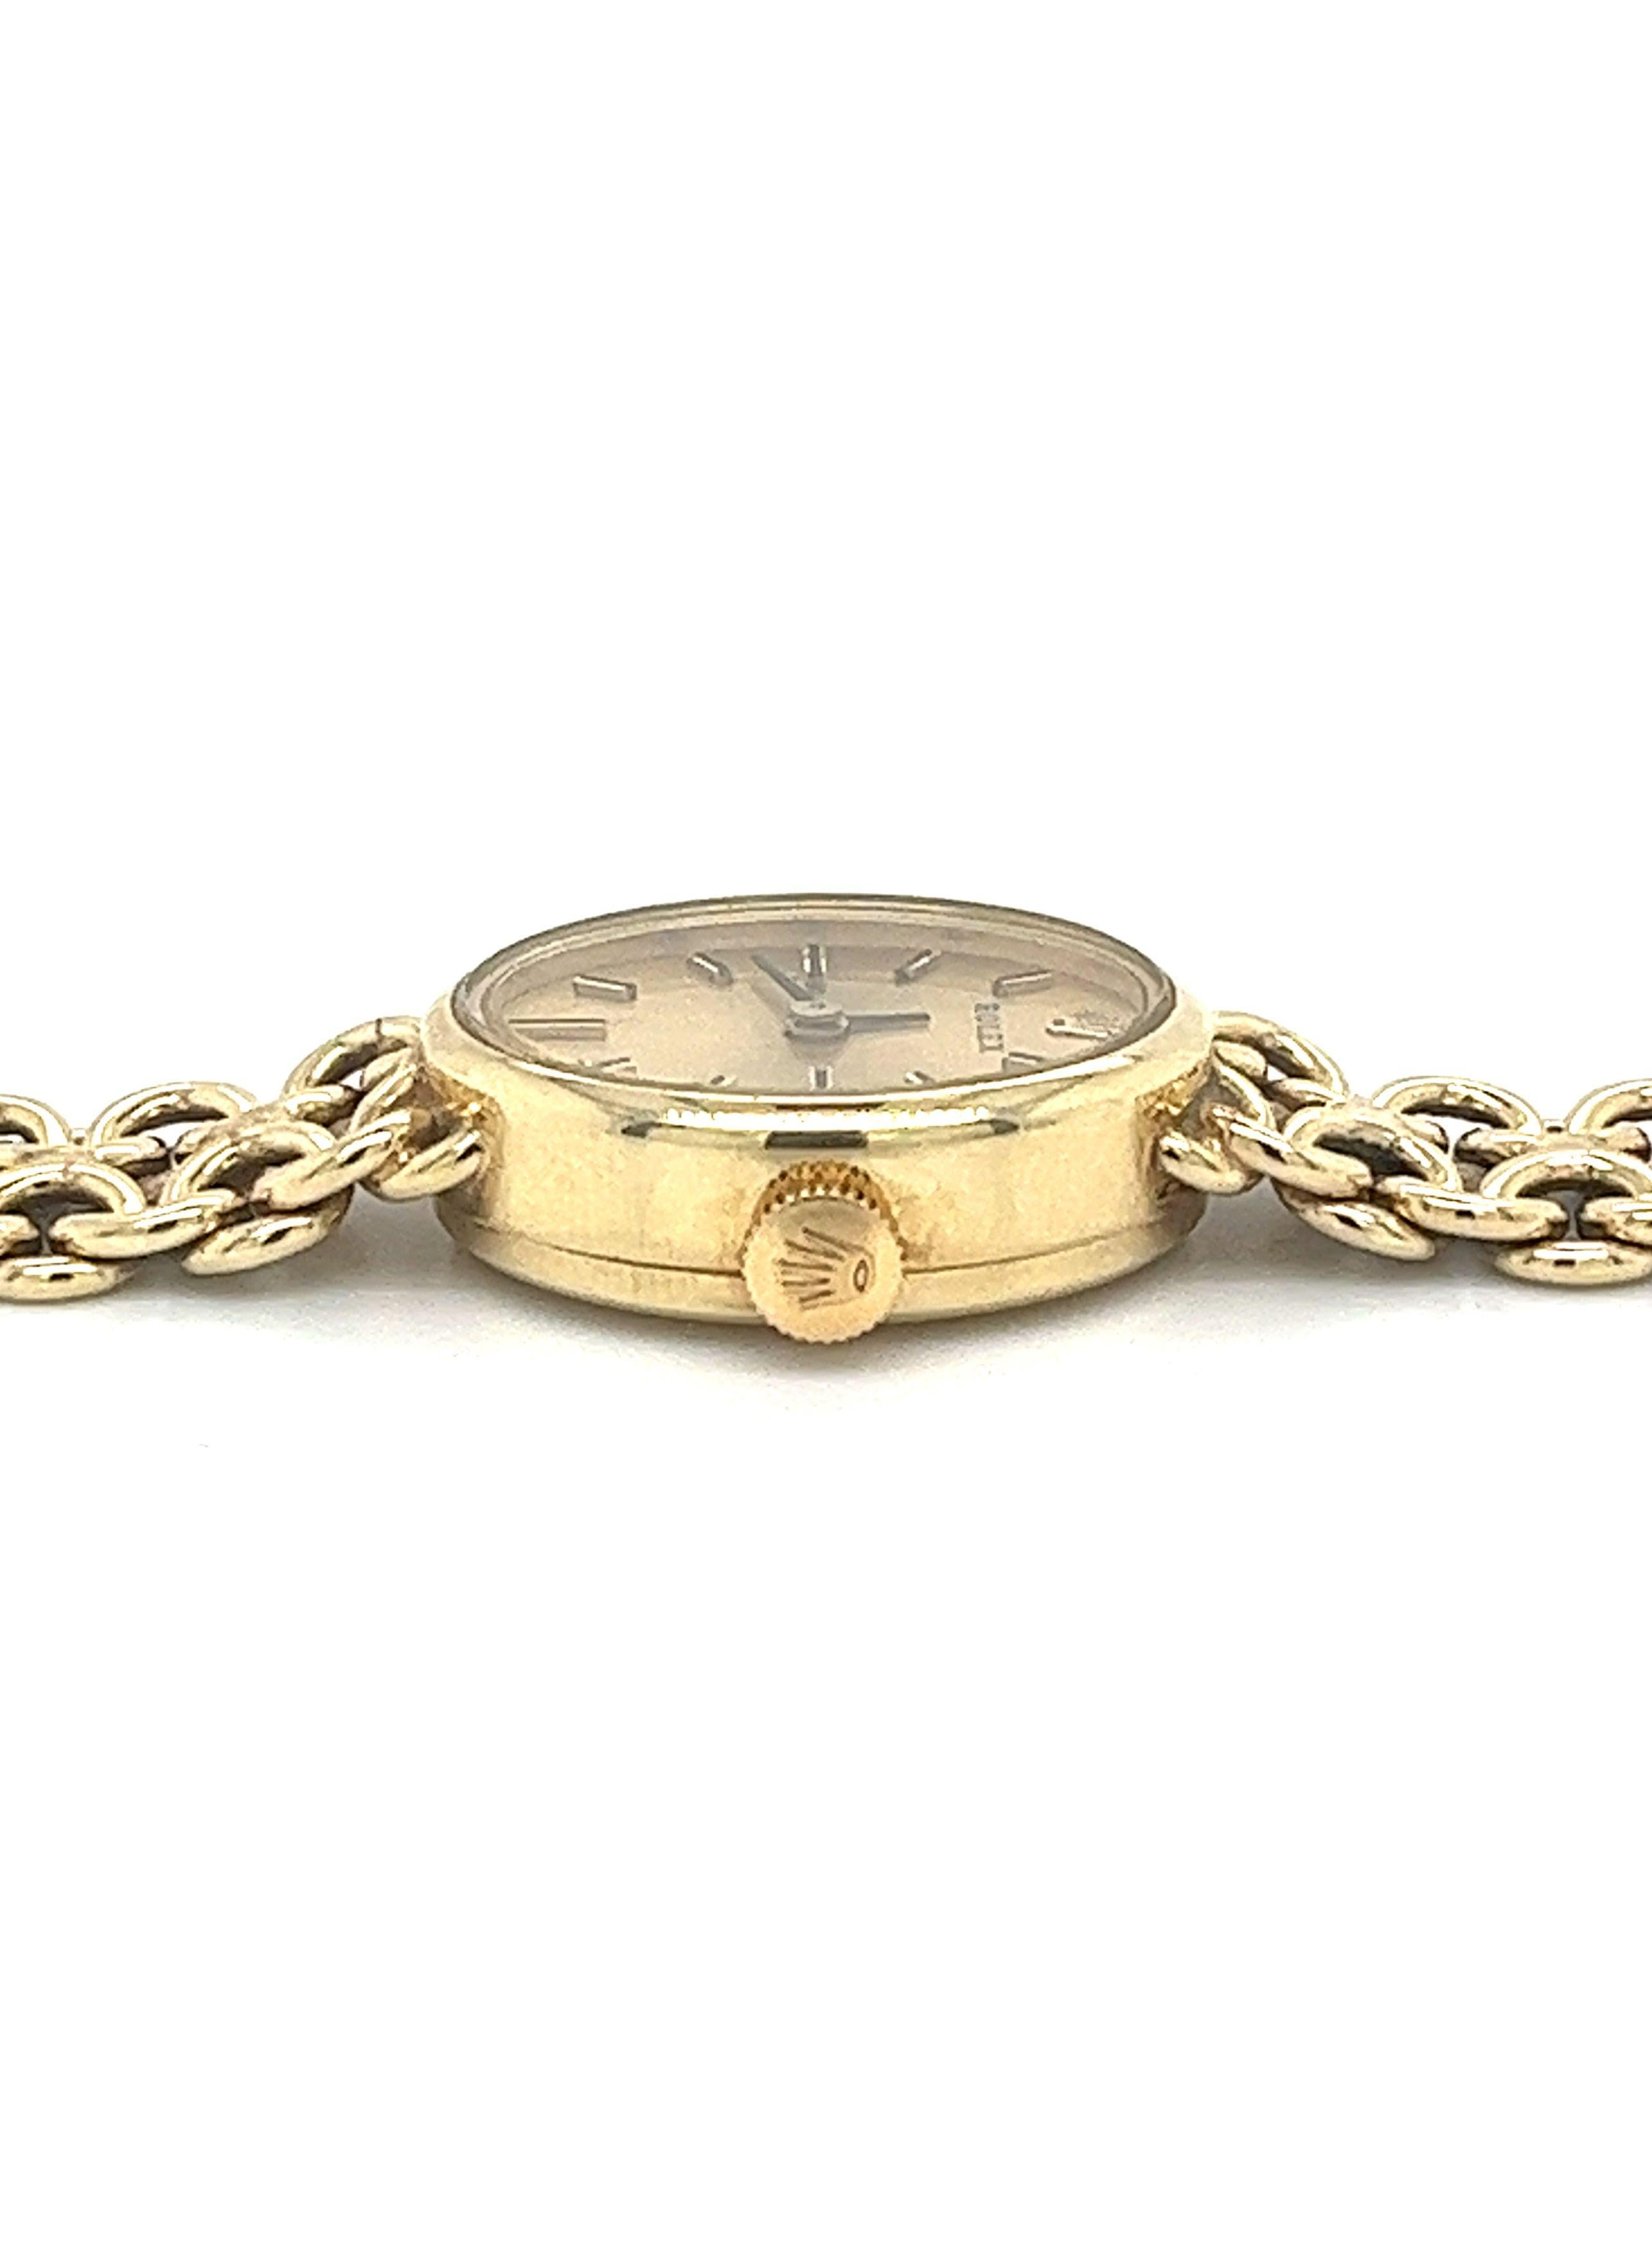 Art Deco Vintage Rolex Manual Wind Ladies Watch in 14K Yellow Gold in Milanese/Mesh Band